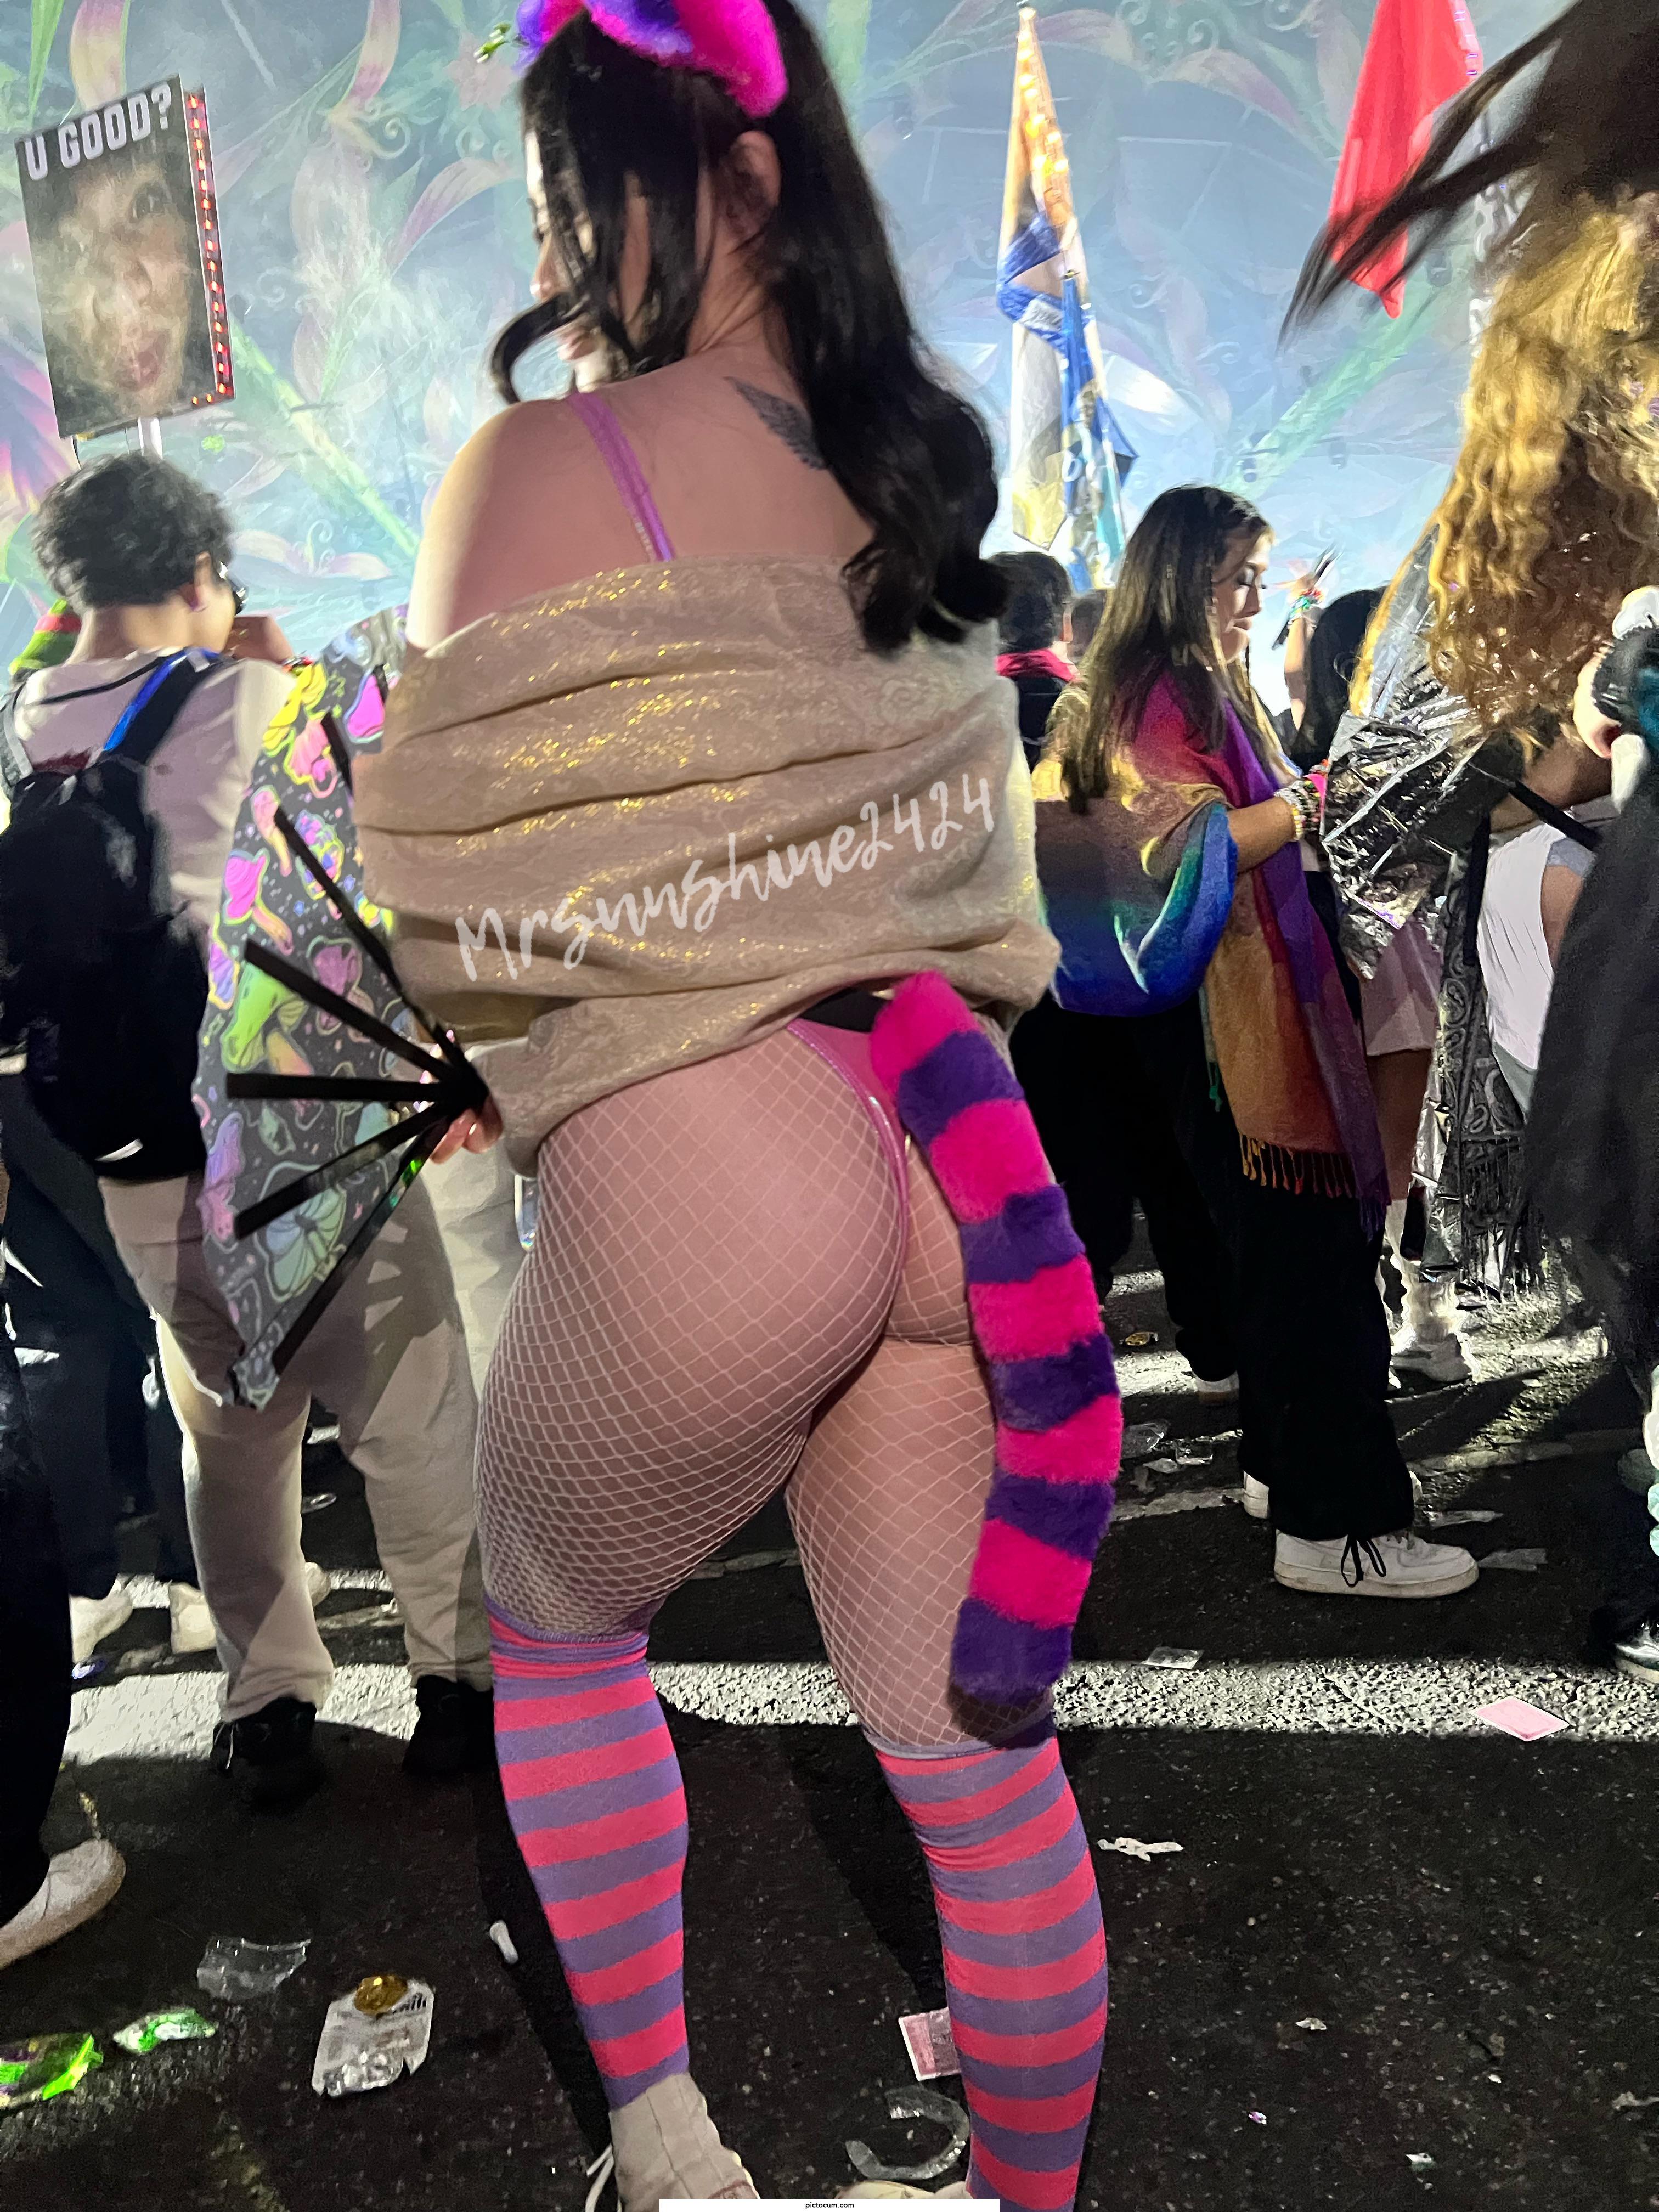 Day 1 beyond wonderland last night 🥰 who is ready for day 2?!